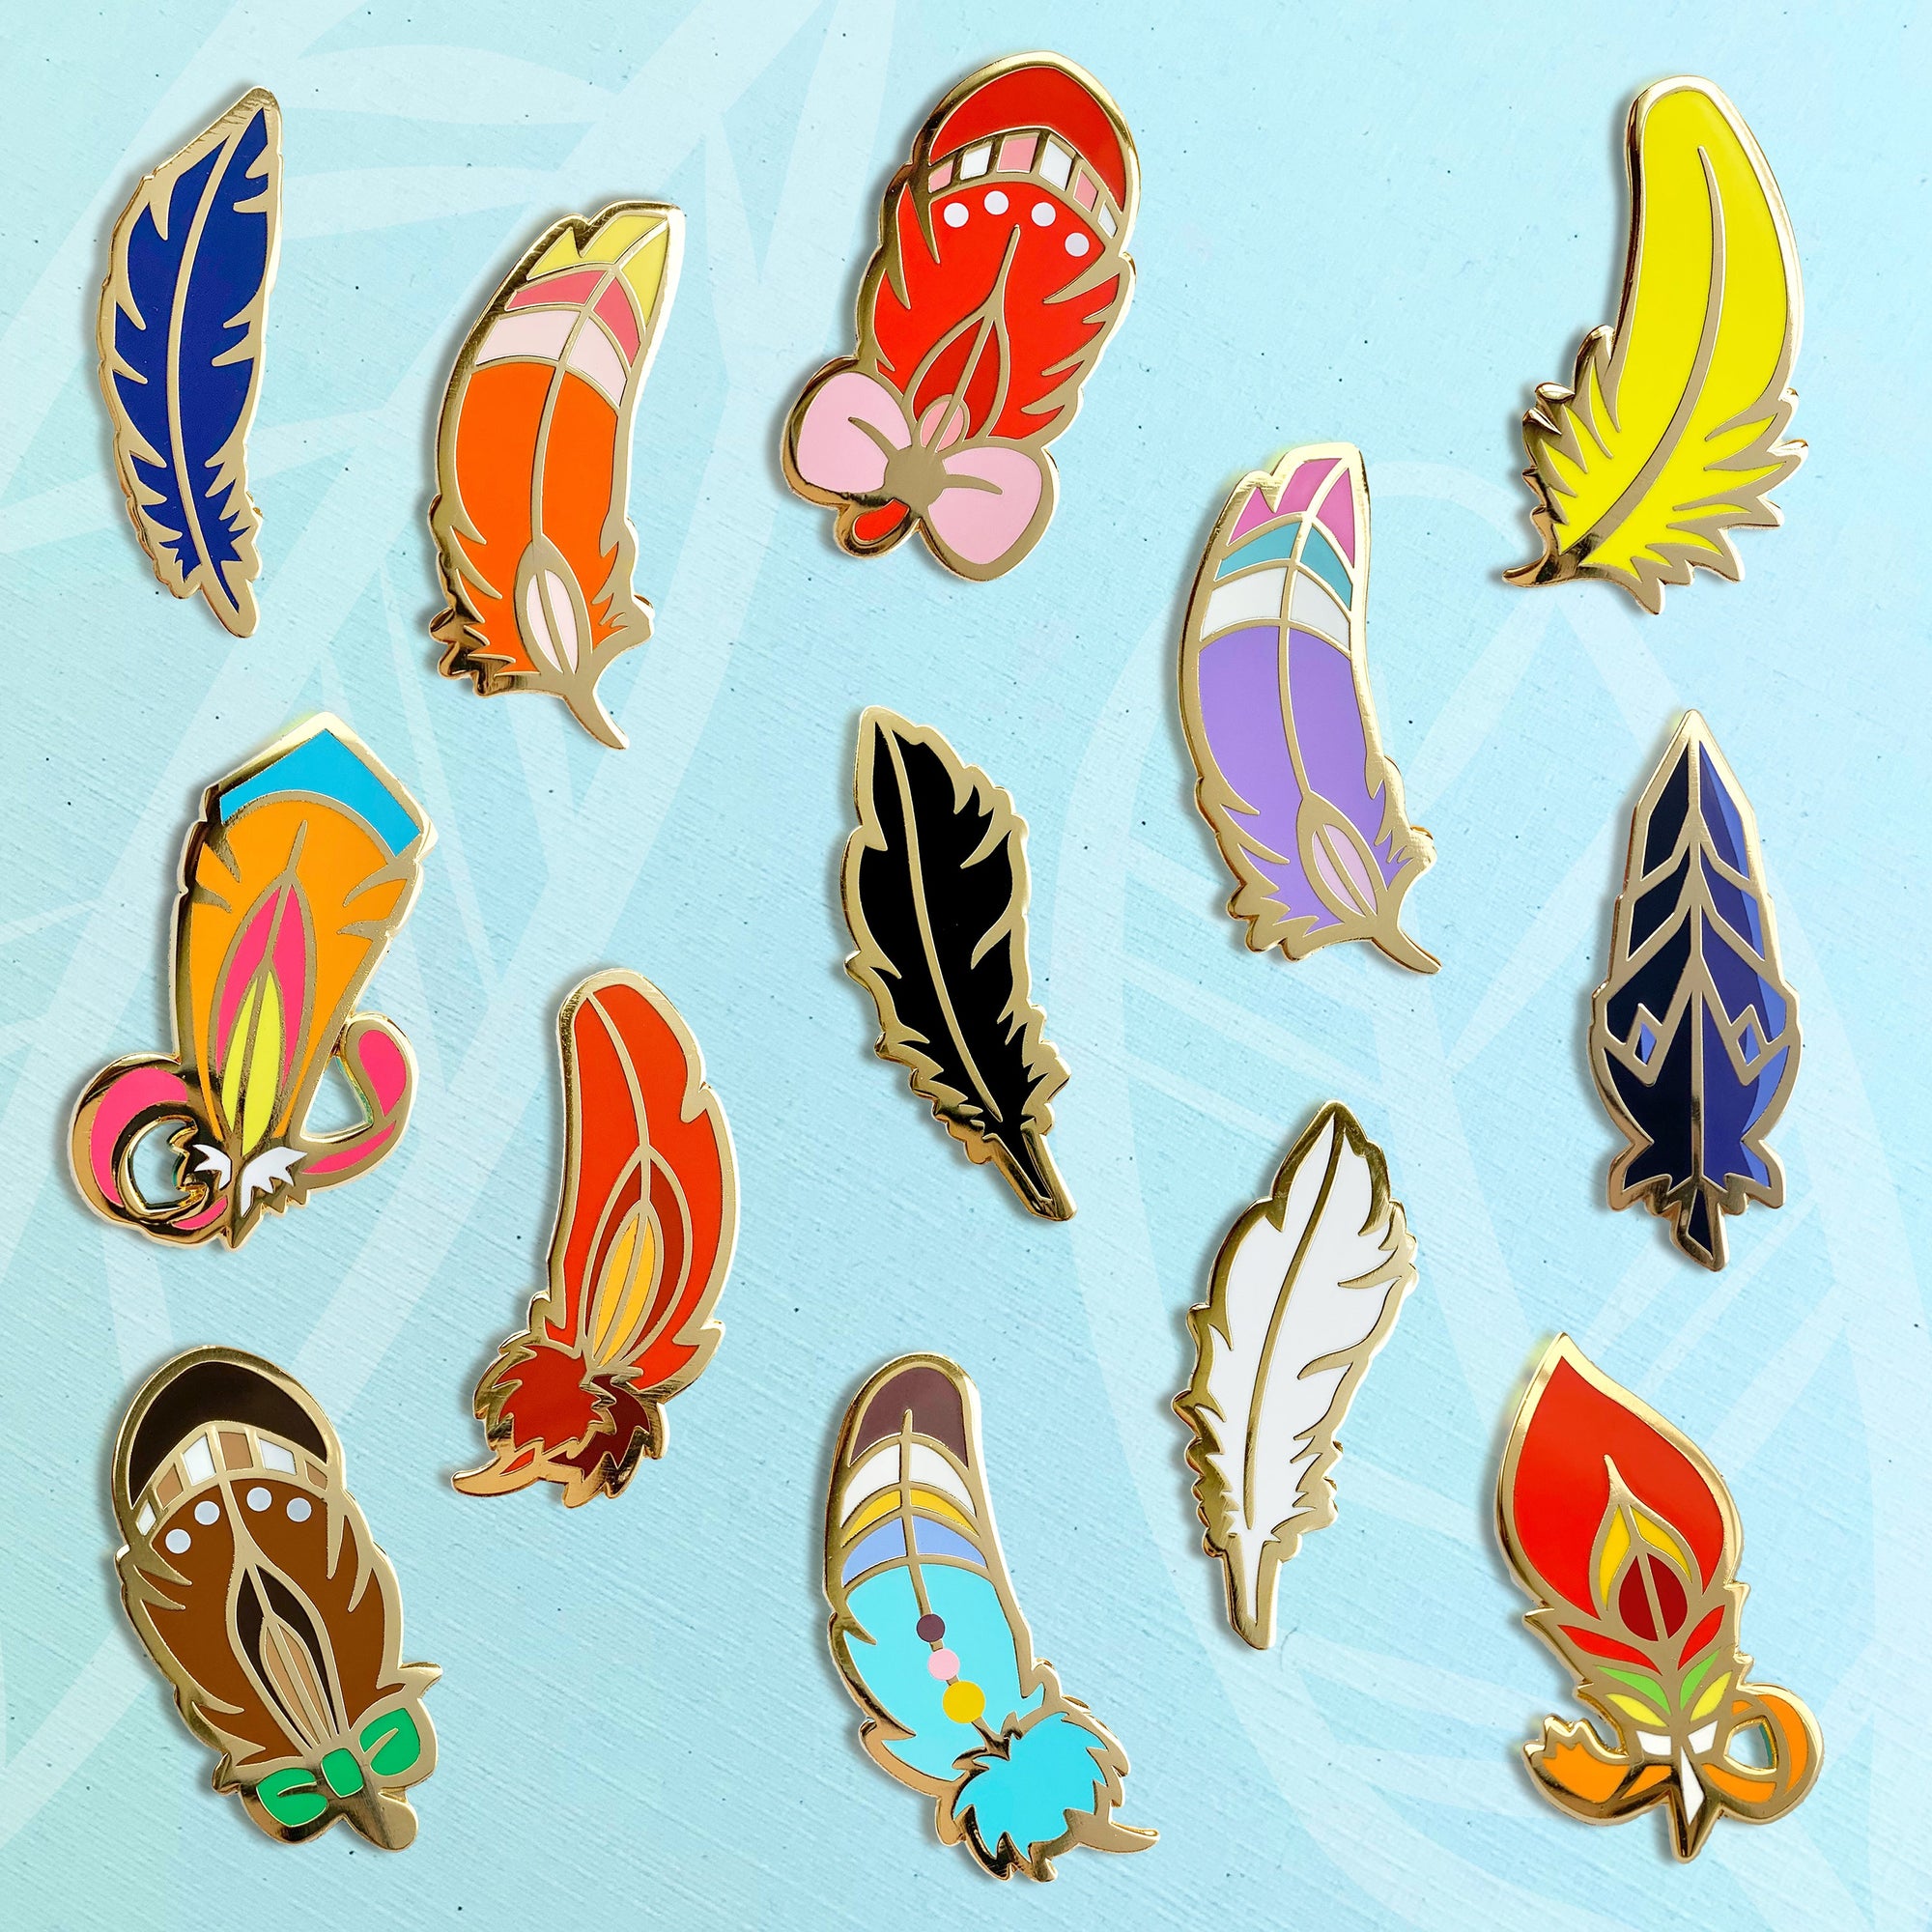 Crimson Loftwing Feather Enamel Pin by Shumi Collective